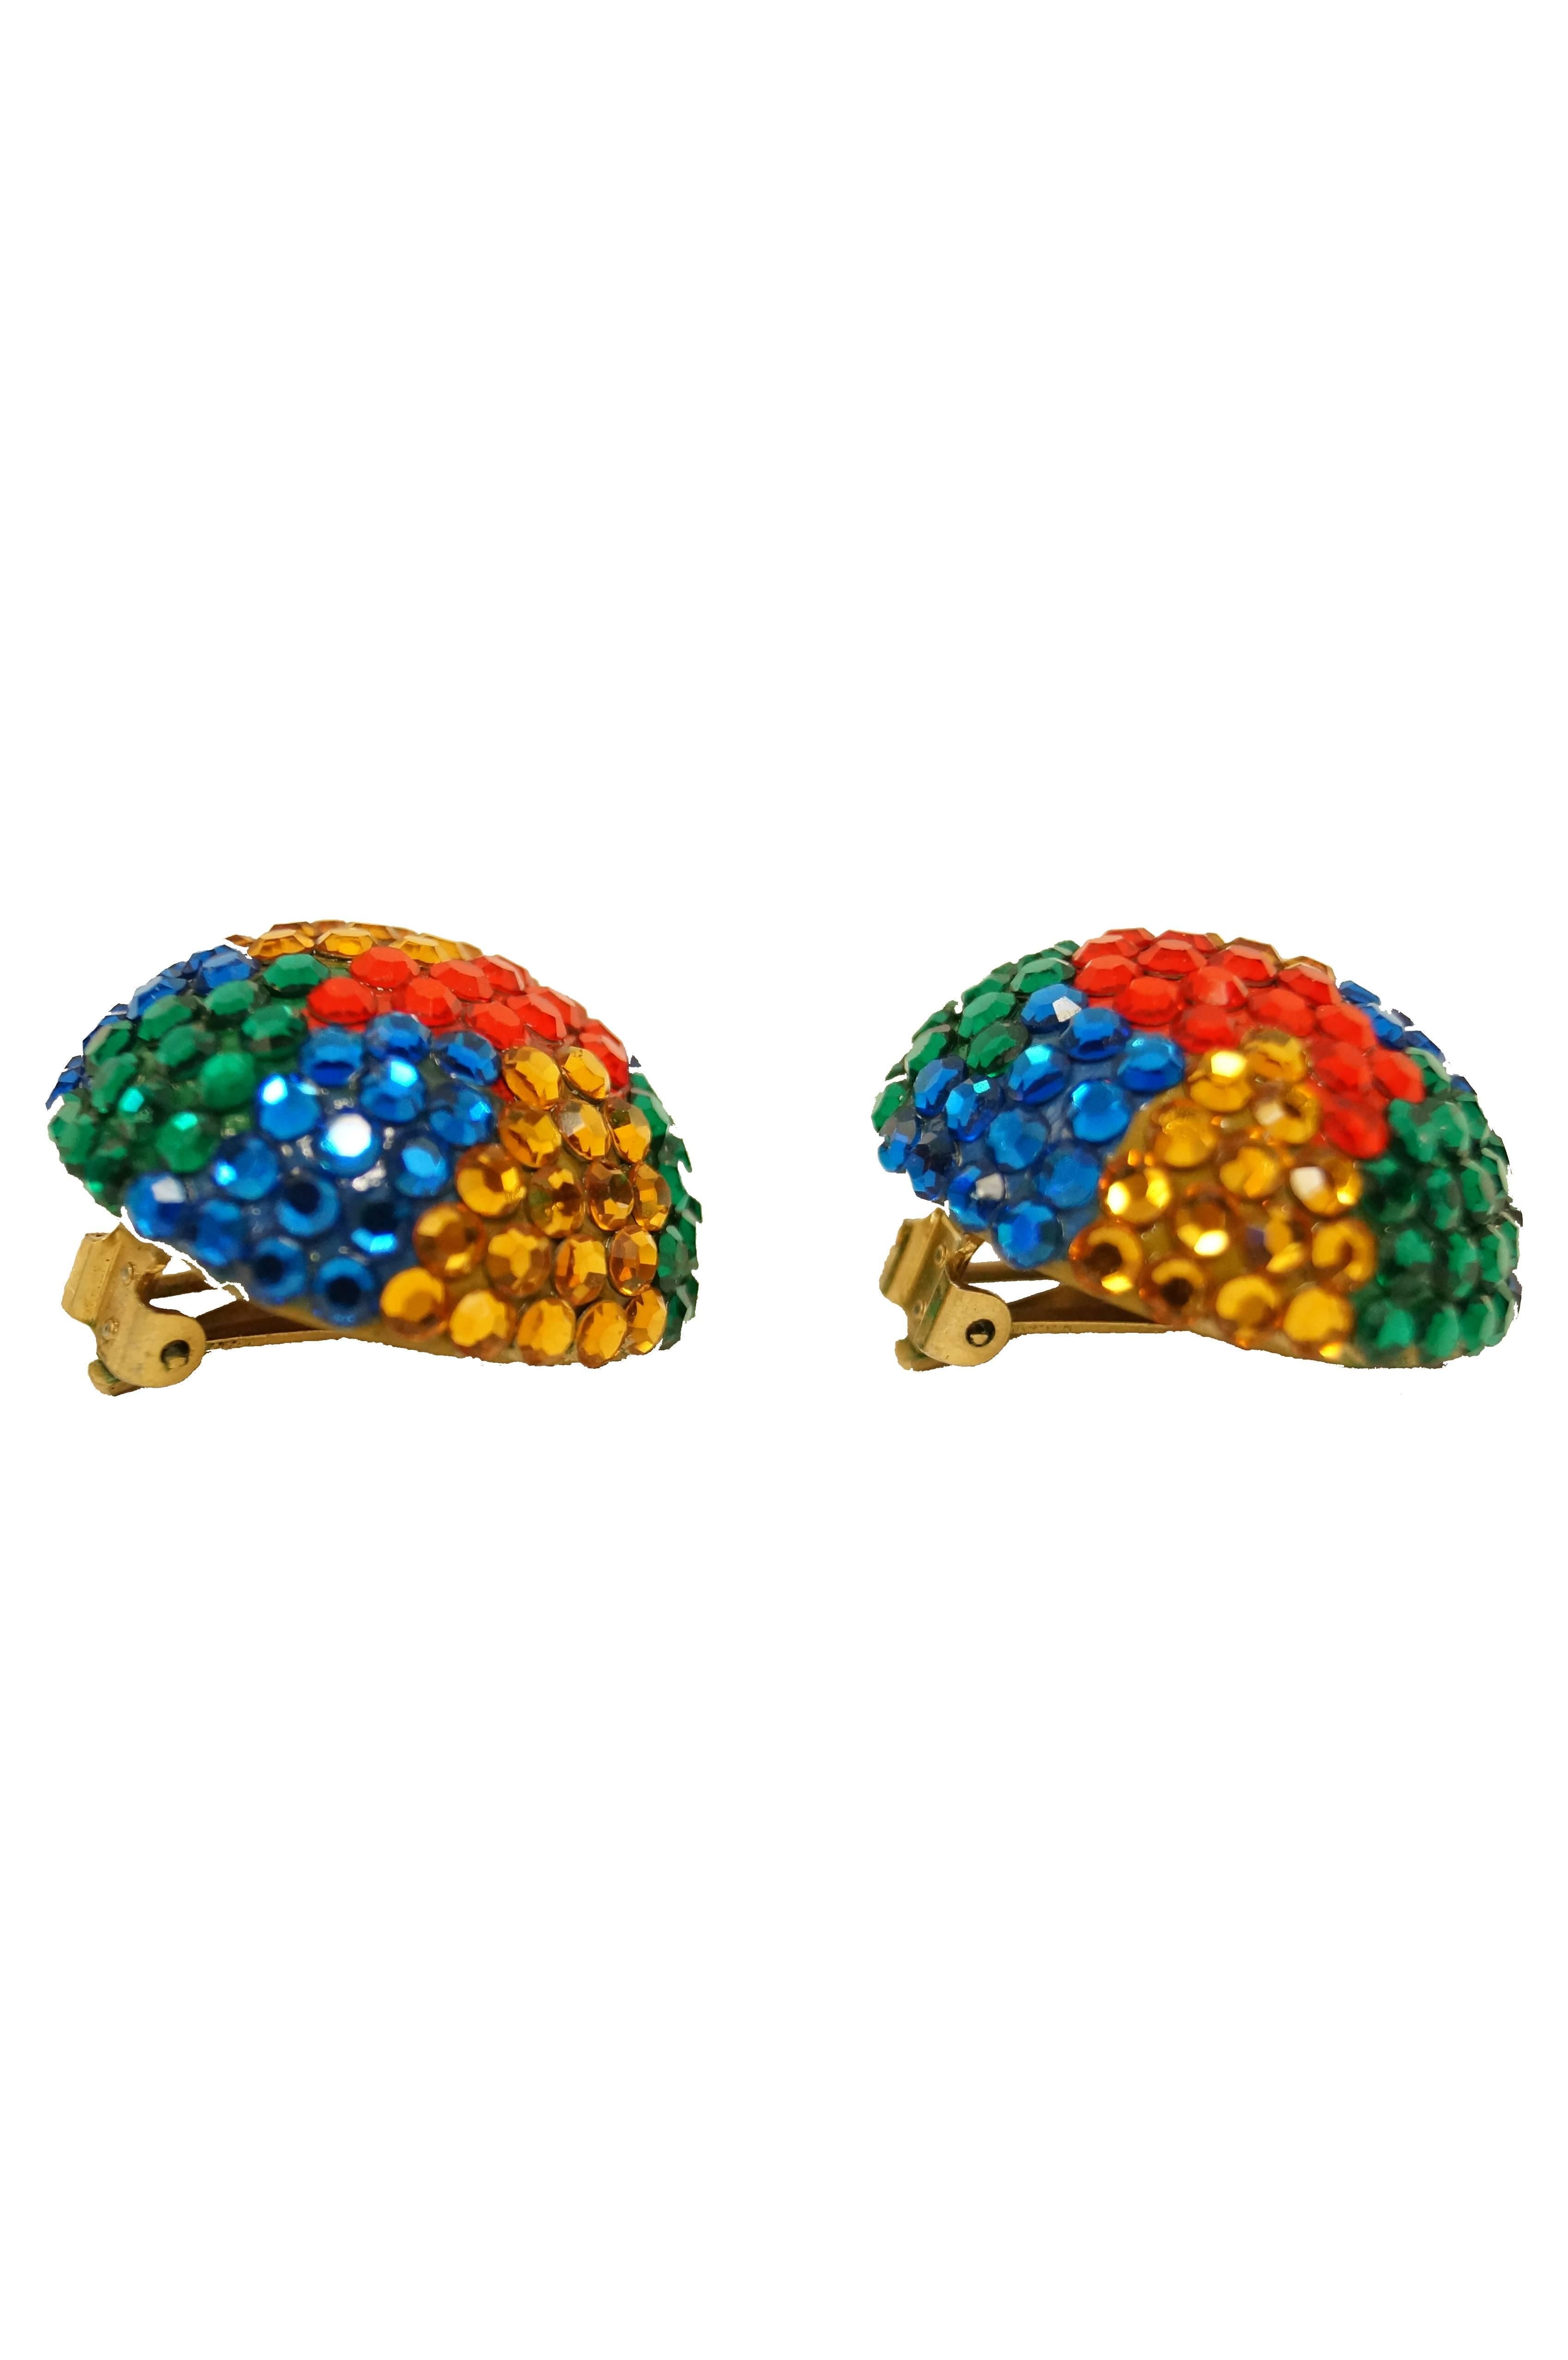 Eye - catching multi color clip earrings by Richard Kerr! The earrings are a half sphere covered in blue, green, red, and yellow multifaceted rhinestones that dazzle and delight! 

Richard Kerr is known for his bedazzled 80's style!